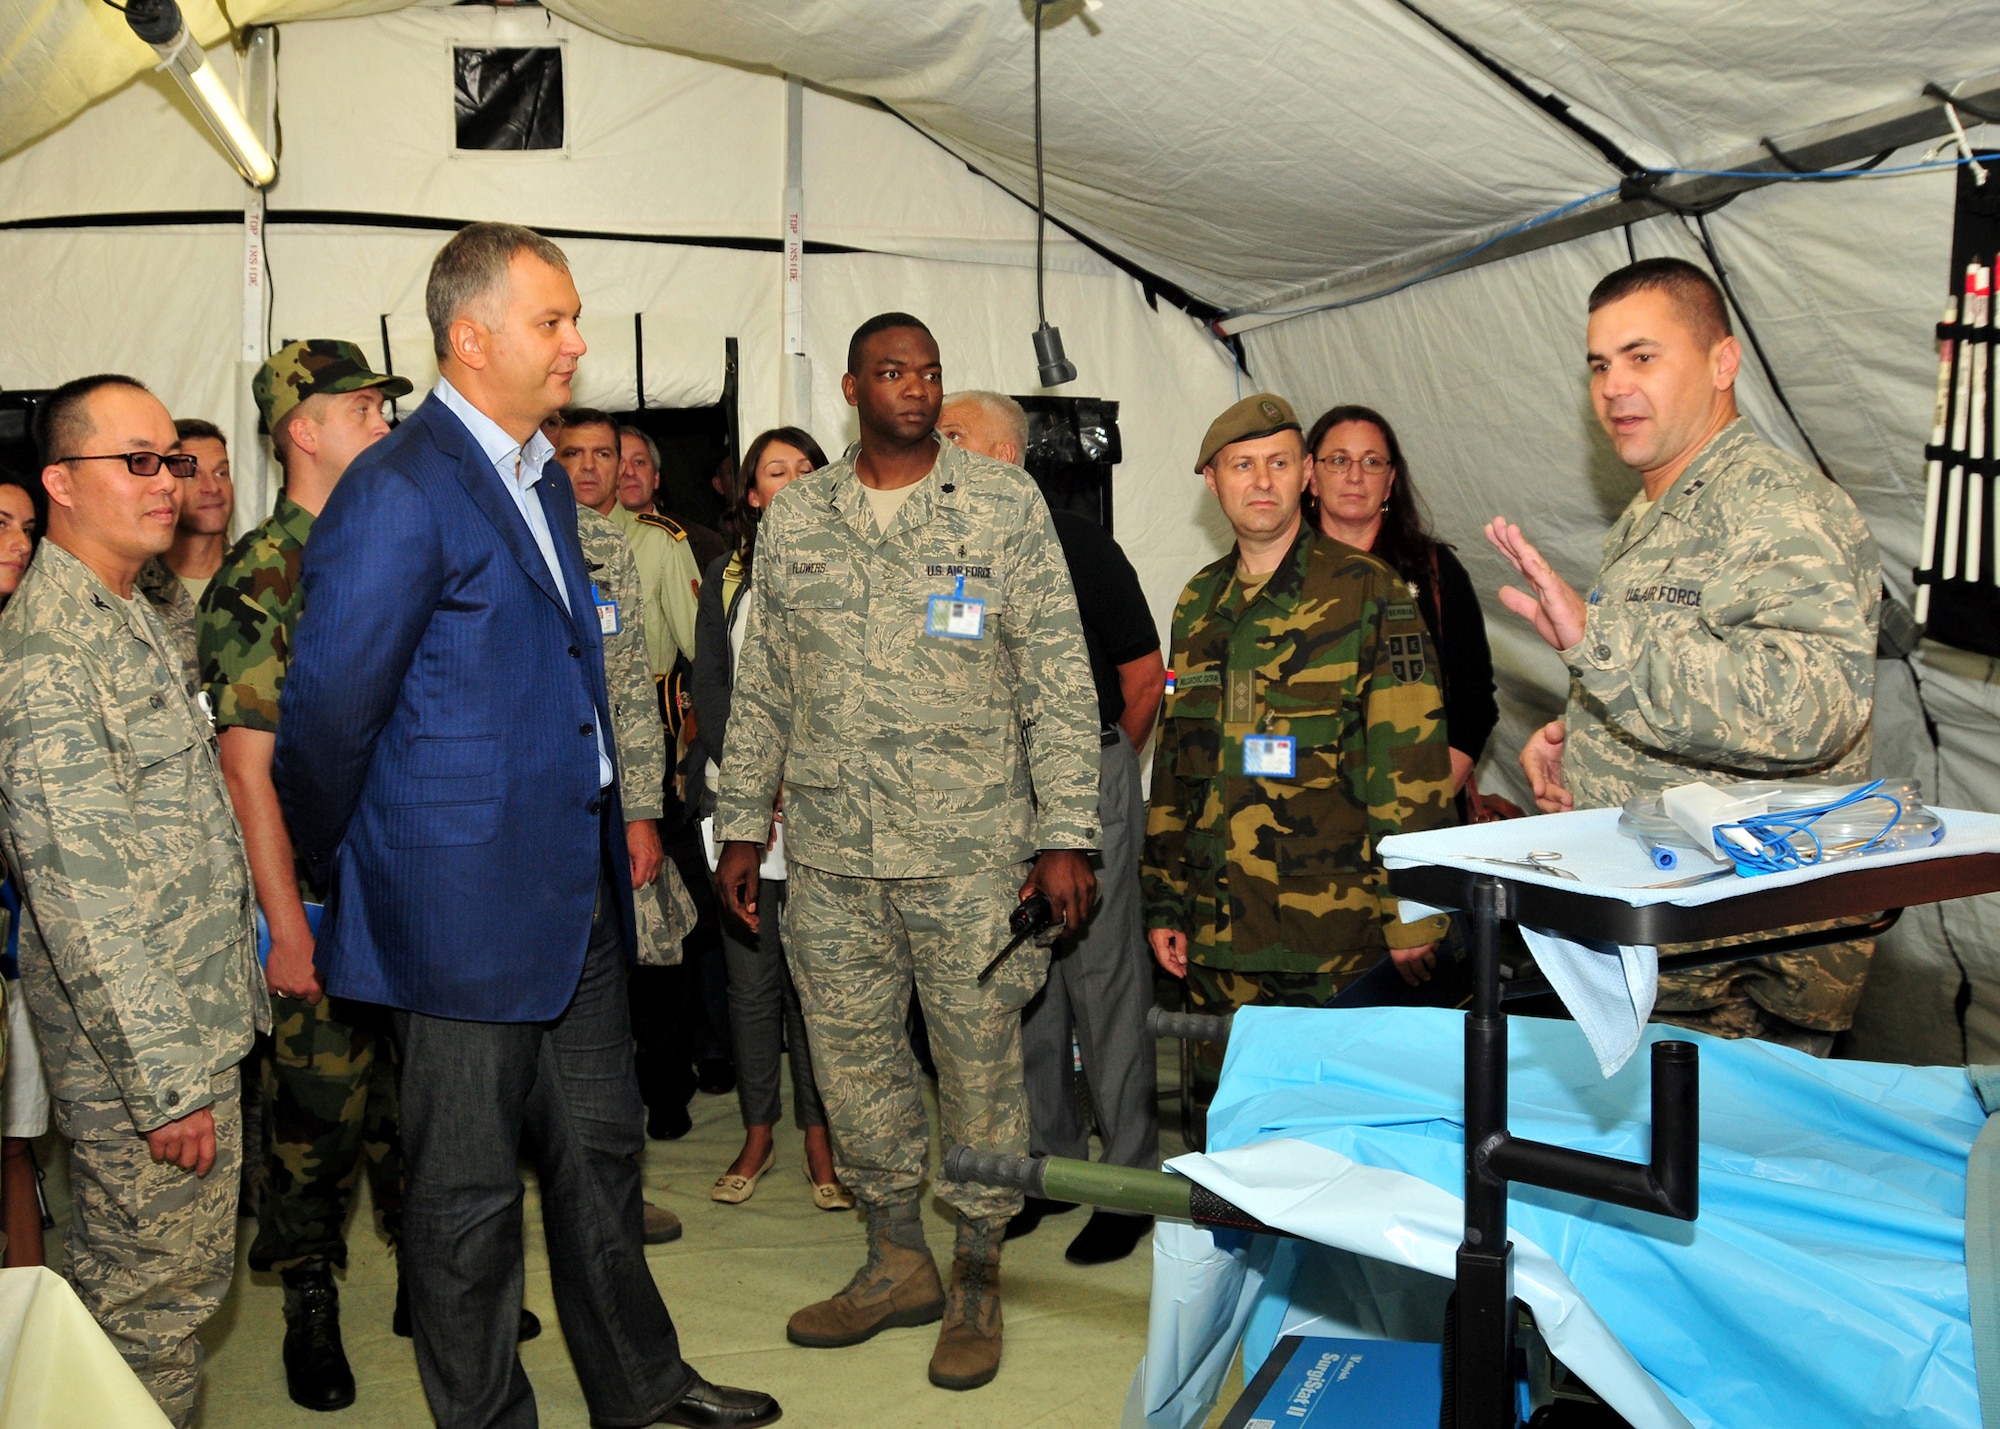 Dragan Sutanovac, Republic of Serbia minister of defense, receives a tour of the 458th Expeditionary Medical Squadron's mobile tent hospital as part of the MEDCEUR 09 distinguished visitors' day in Nis, Serbia, Sept. 10, 2009.  MEDCEUR is an annual joint and combined medical exercise with a focus on major disaster response and mass casualty situations.  More than 700 exercise participants from 15 countries are taking part in this year’s exercise, which is hosted by Serbia. (U.S. Air Force photo by Staff Sgt. Markus M. Maier)